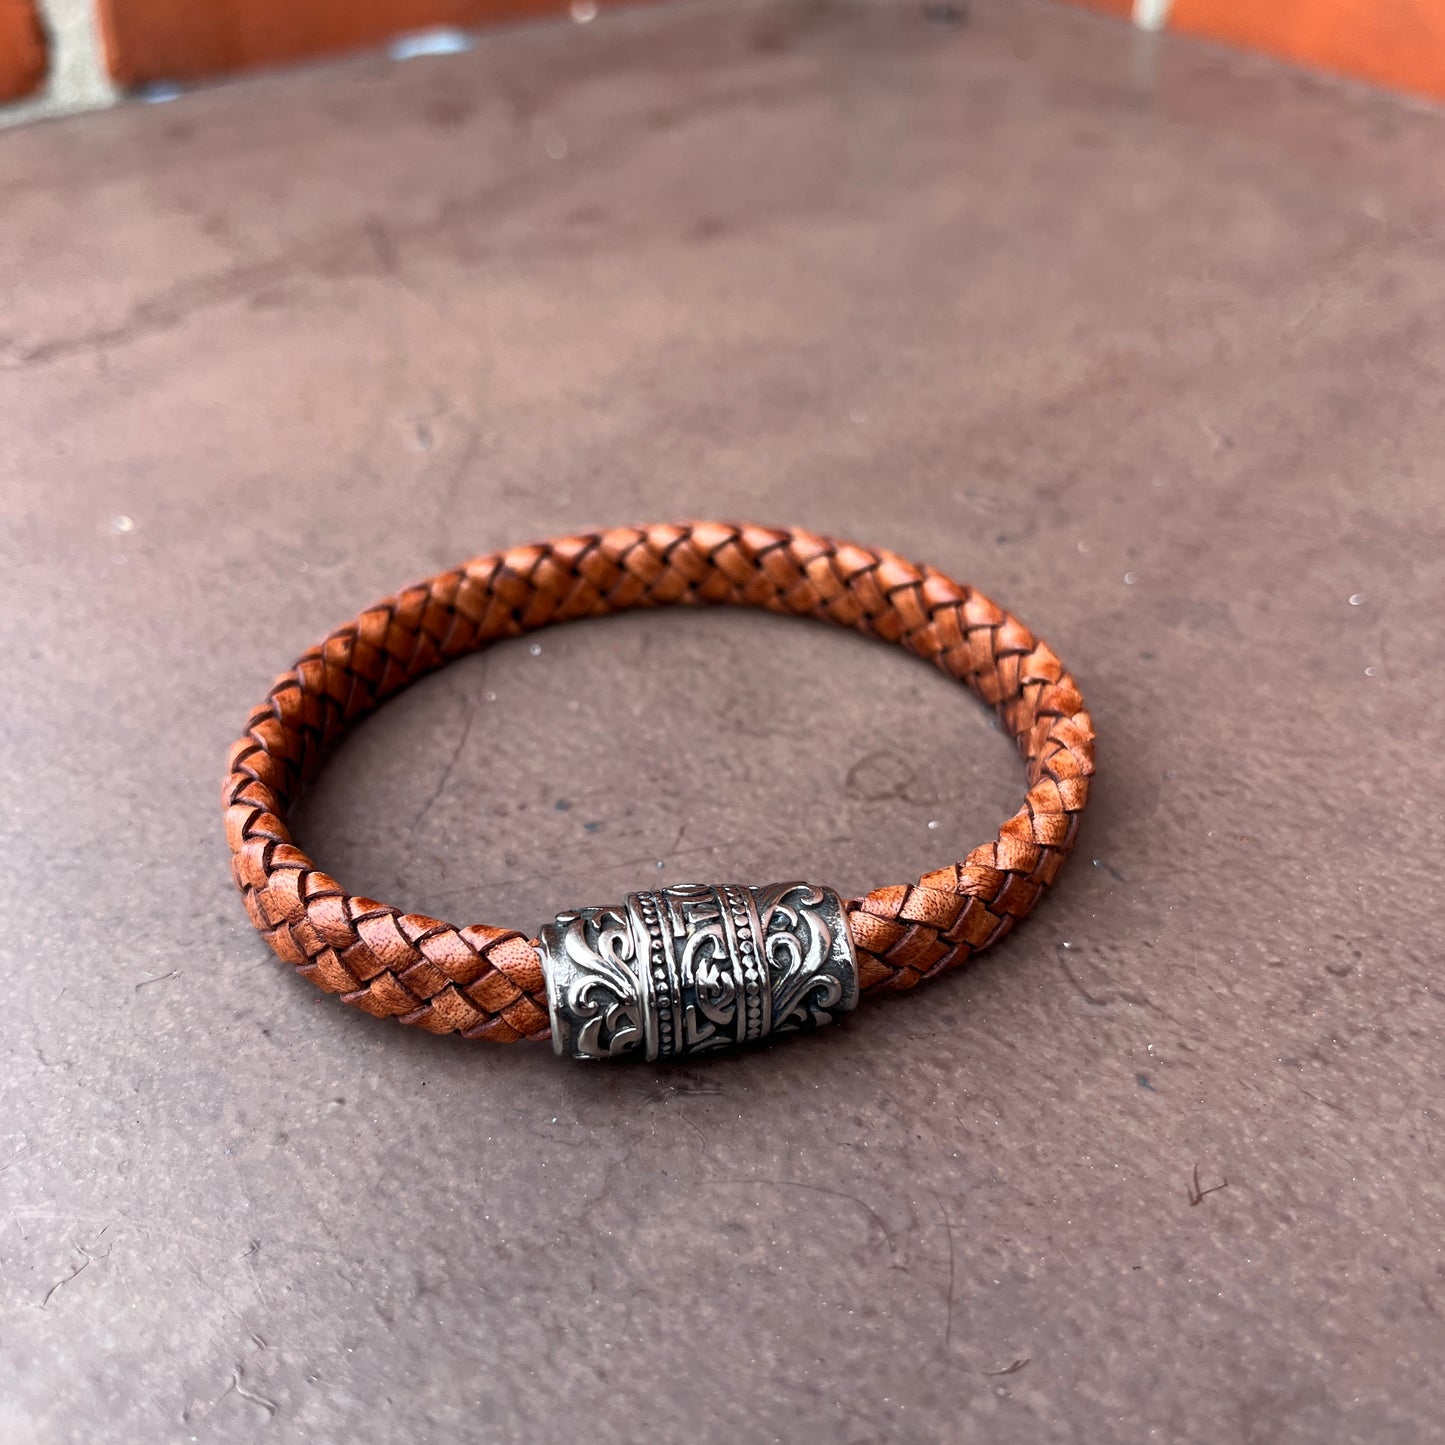 BRAIDED FLAT LEATHER BRACELET WITH STAINLESS STEEL TRIBAL MAGNET CLASP